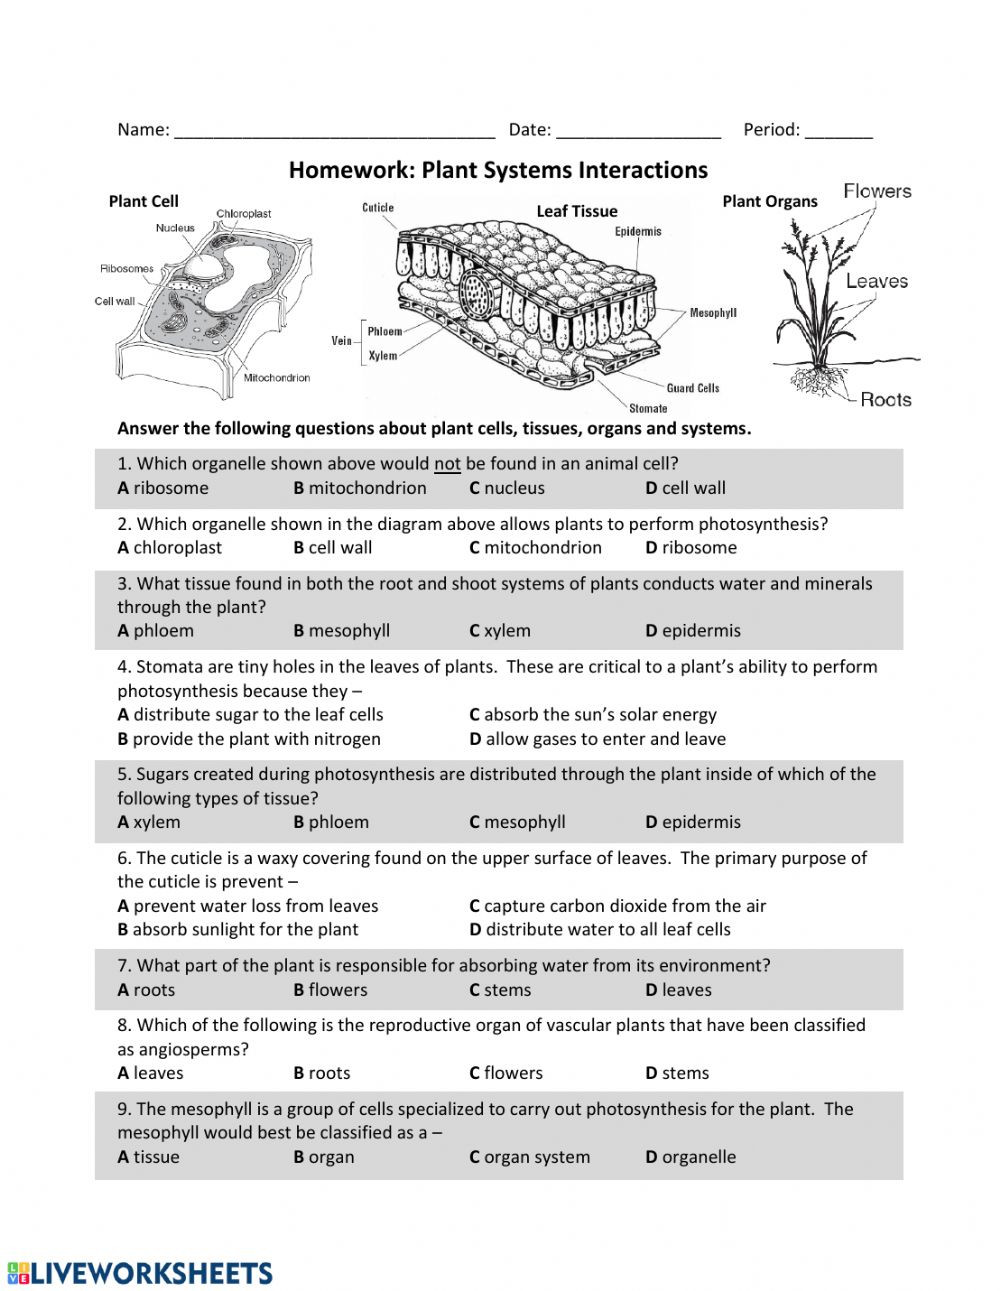 Photosynthesis Diagrams Worksheet Answers Plant Systems Interactions Interactive Worksheet